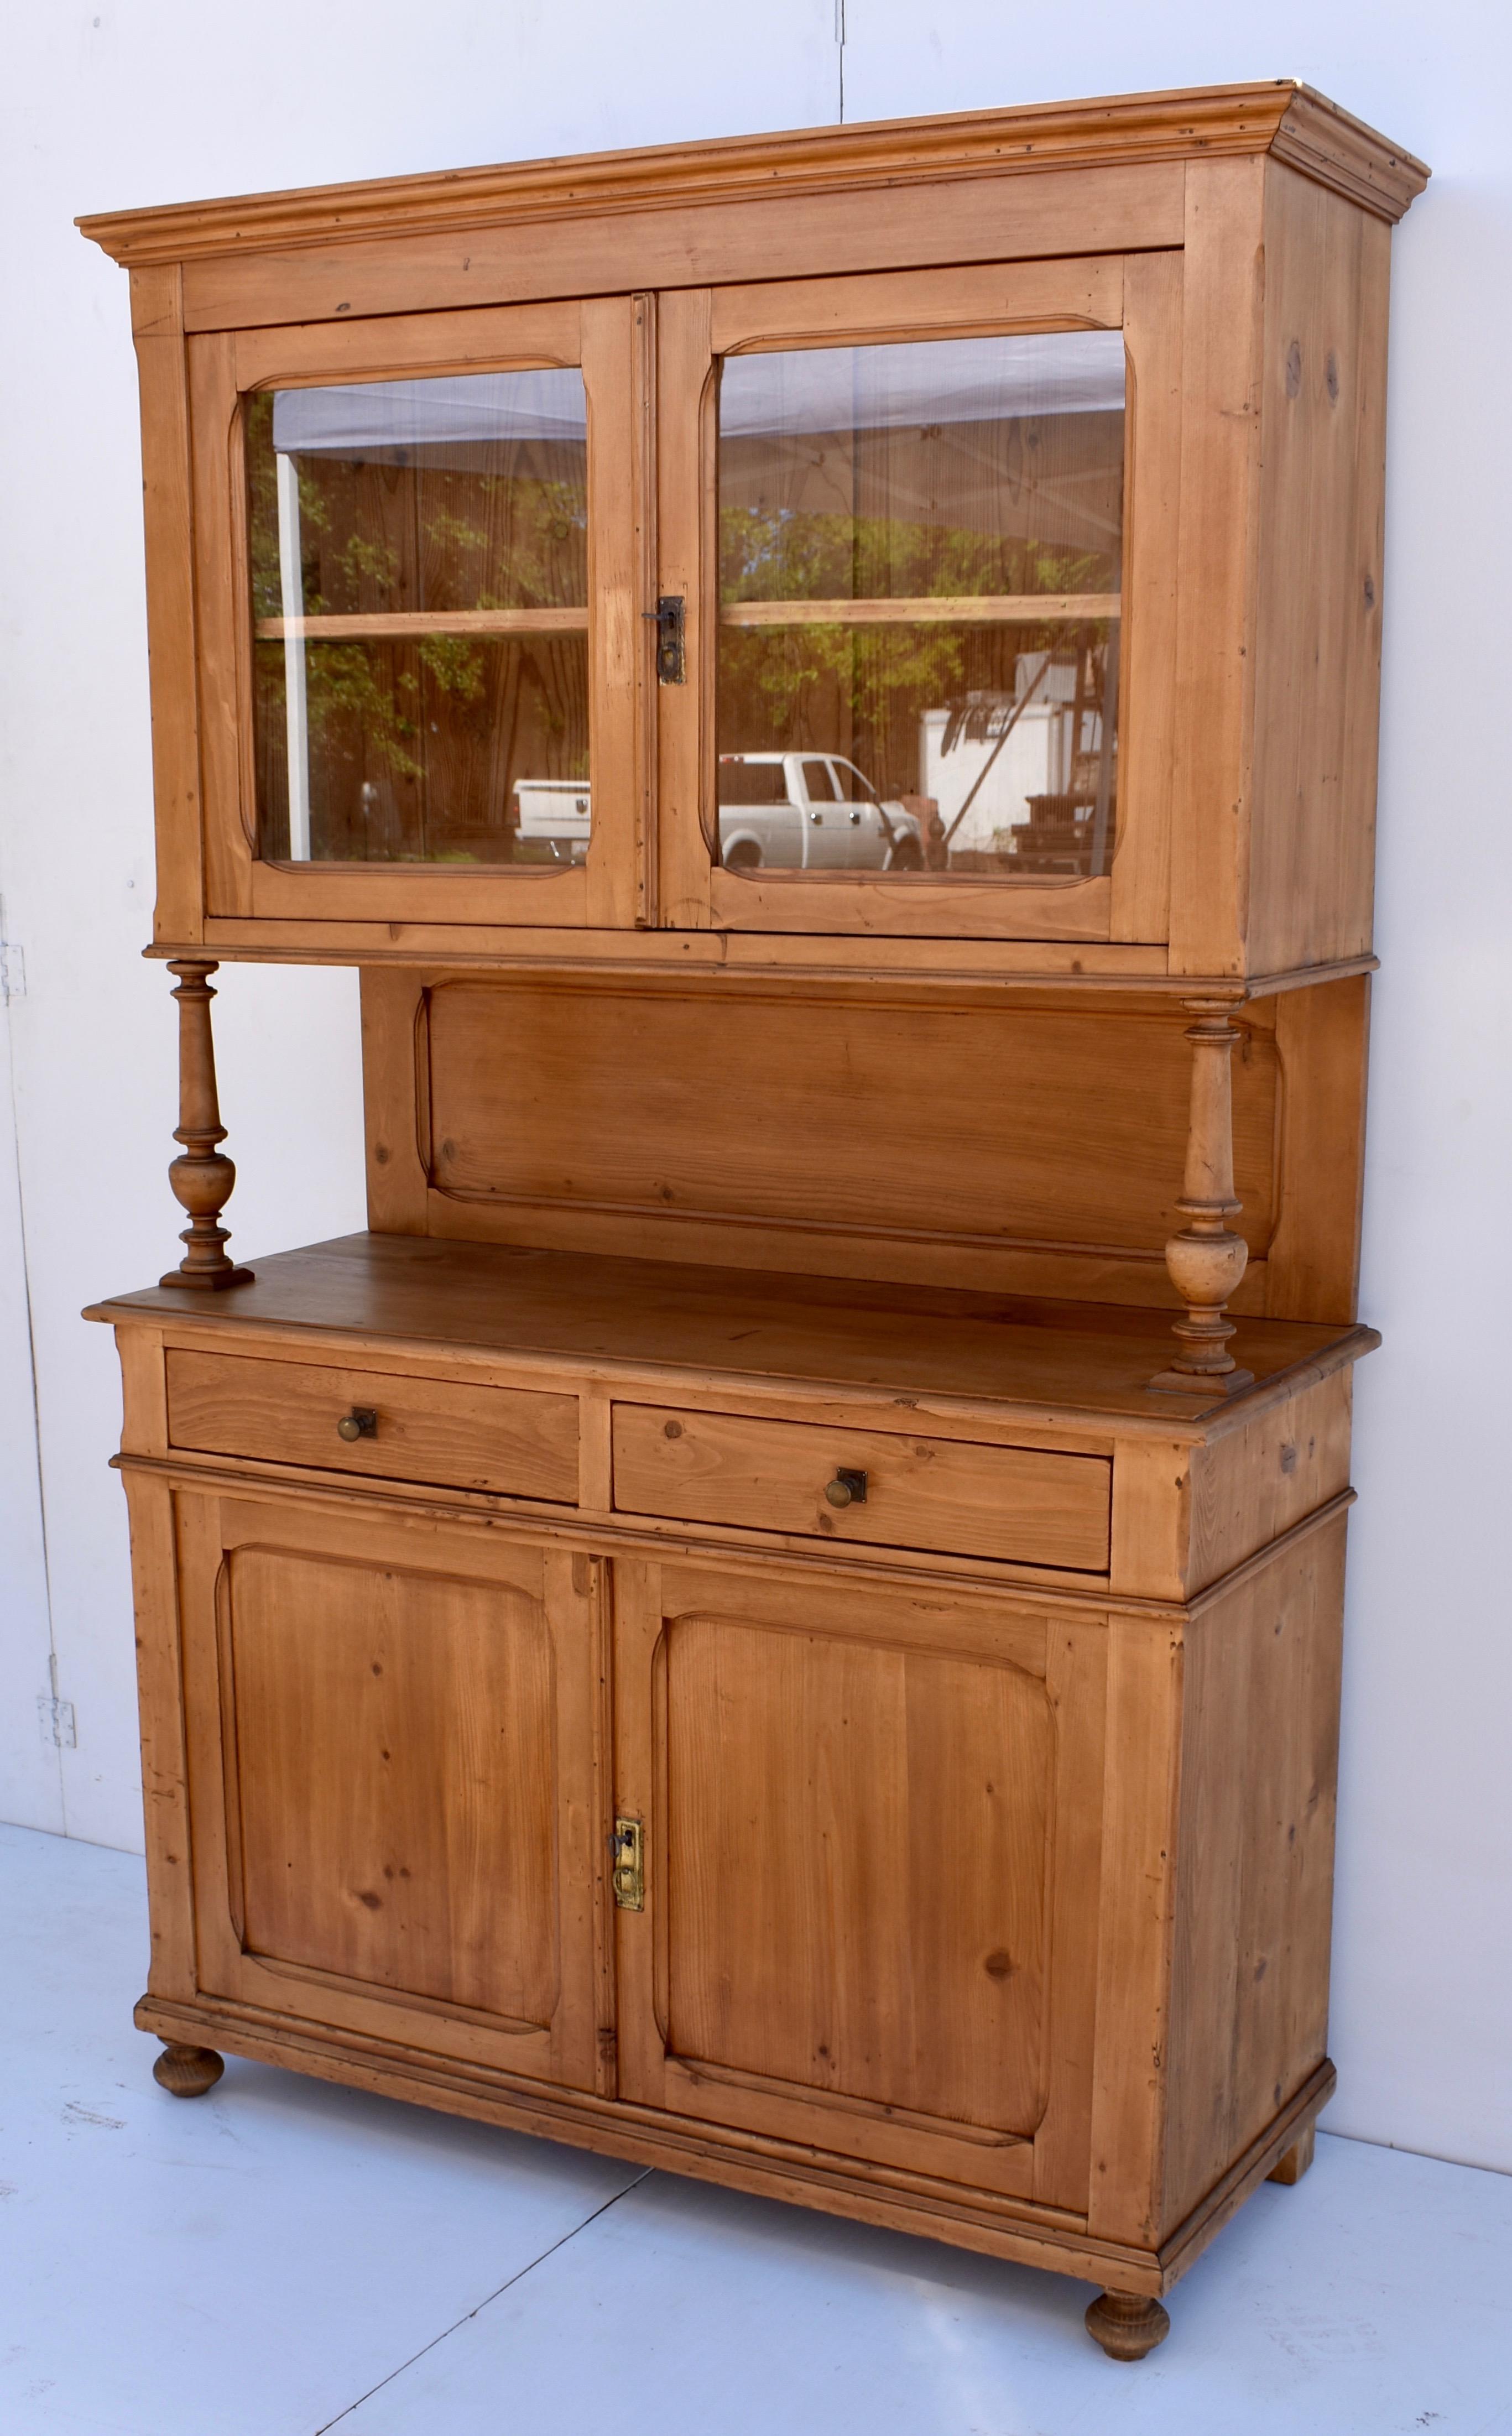 This handsome Pine Buffet has two glazed doors in the upper section and two blind doors on the lower, all with slightly rounded corners. This, as well as a chamfer on the front corners of each part are the only deviation from a very plain and simple